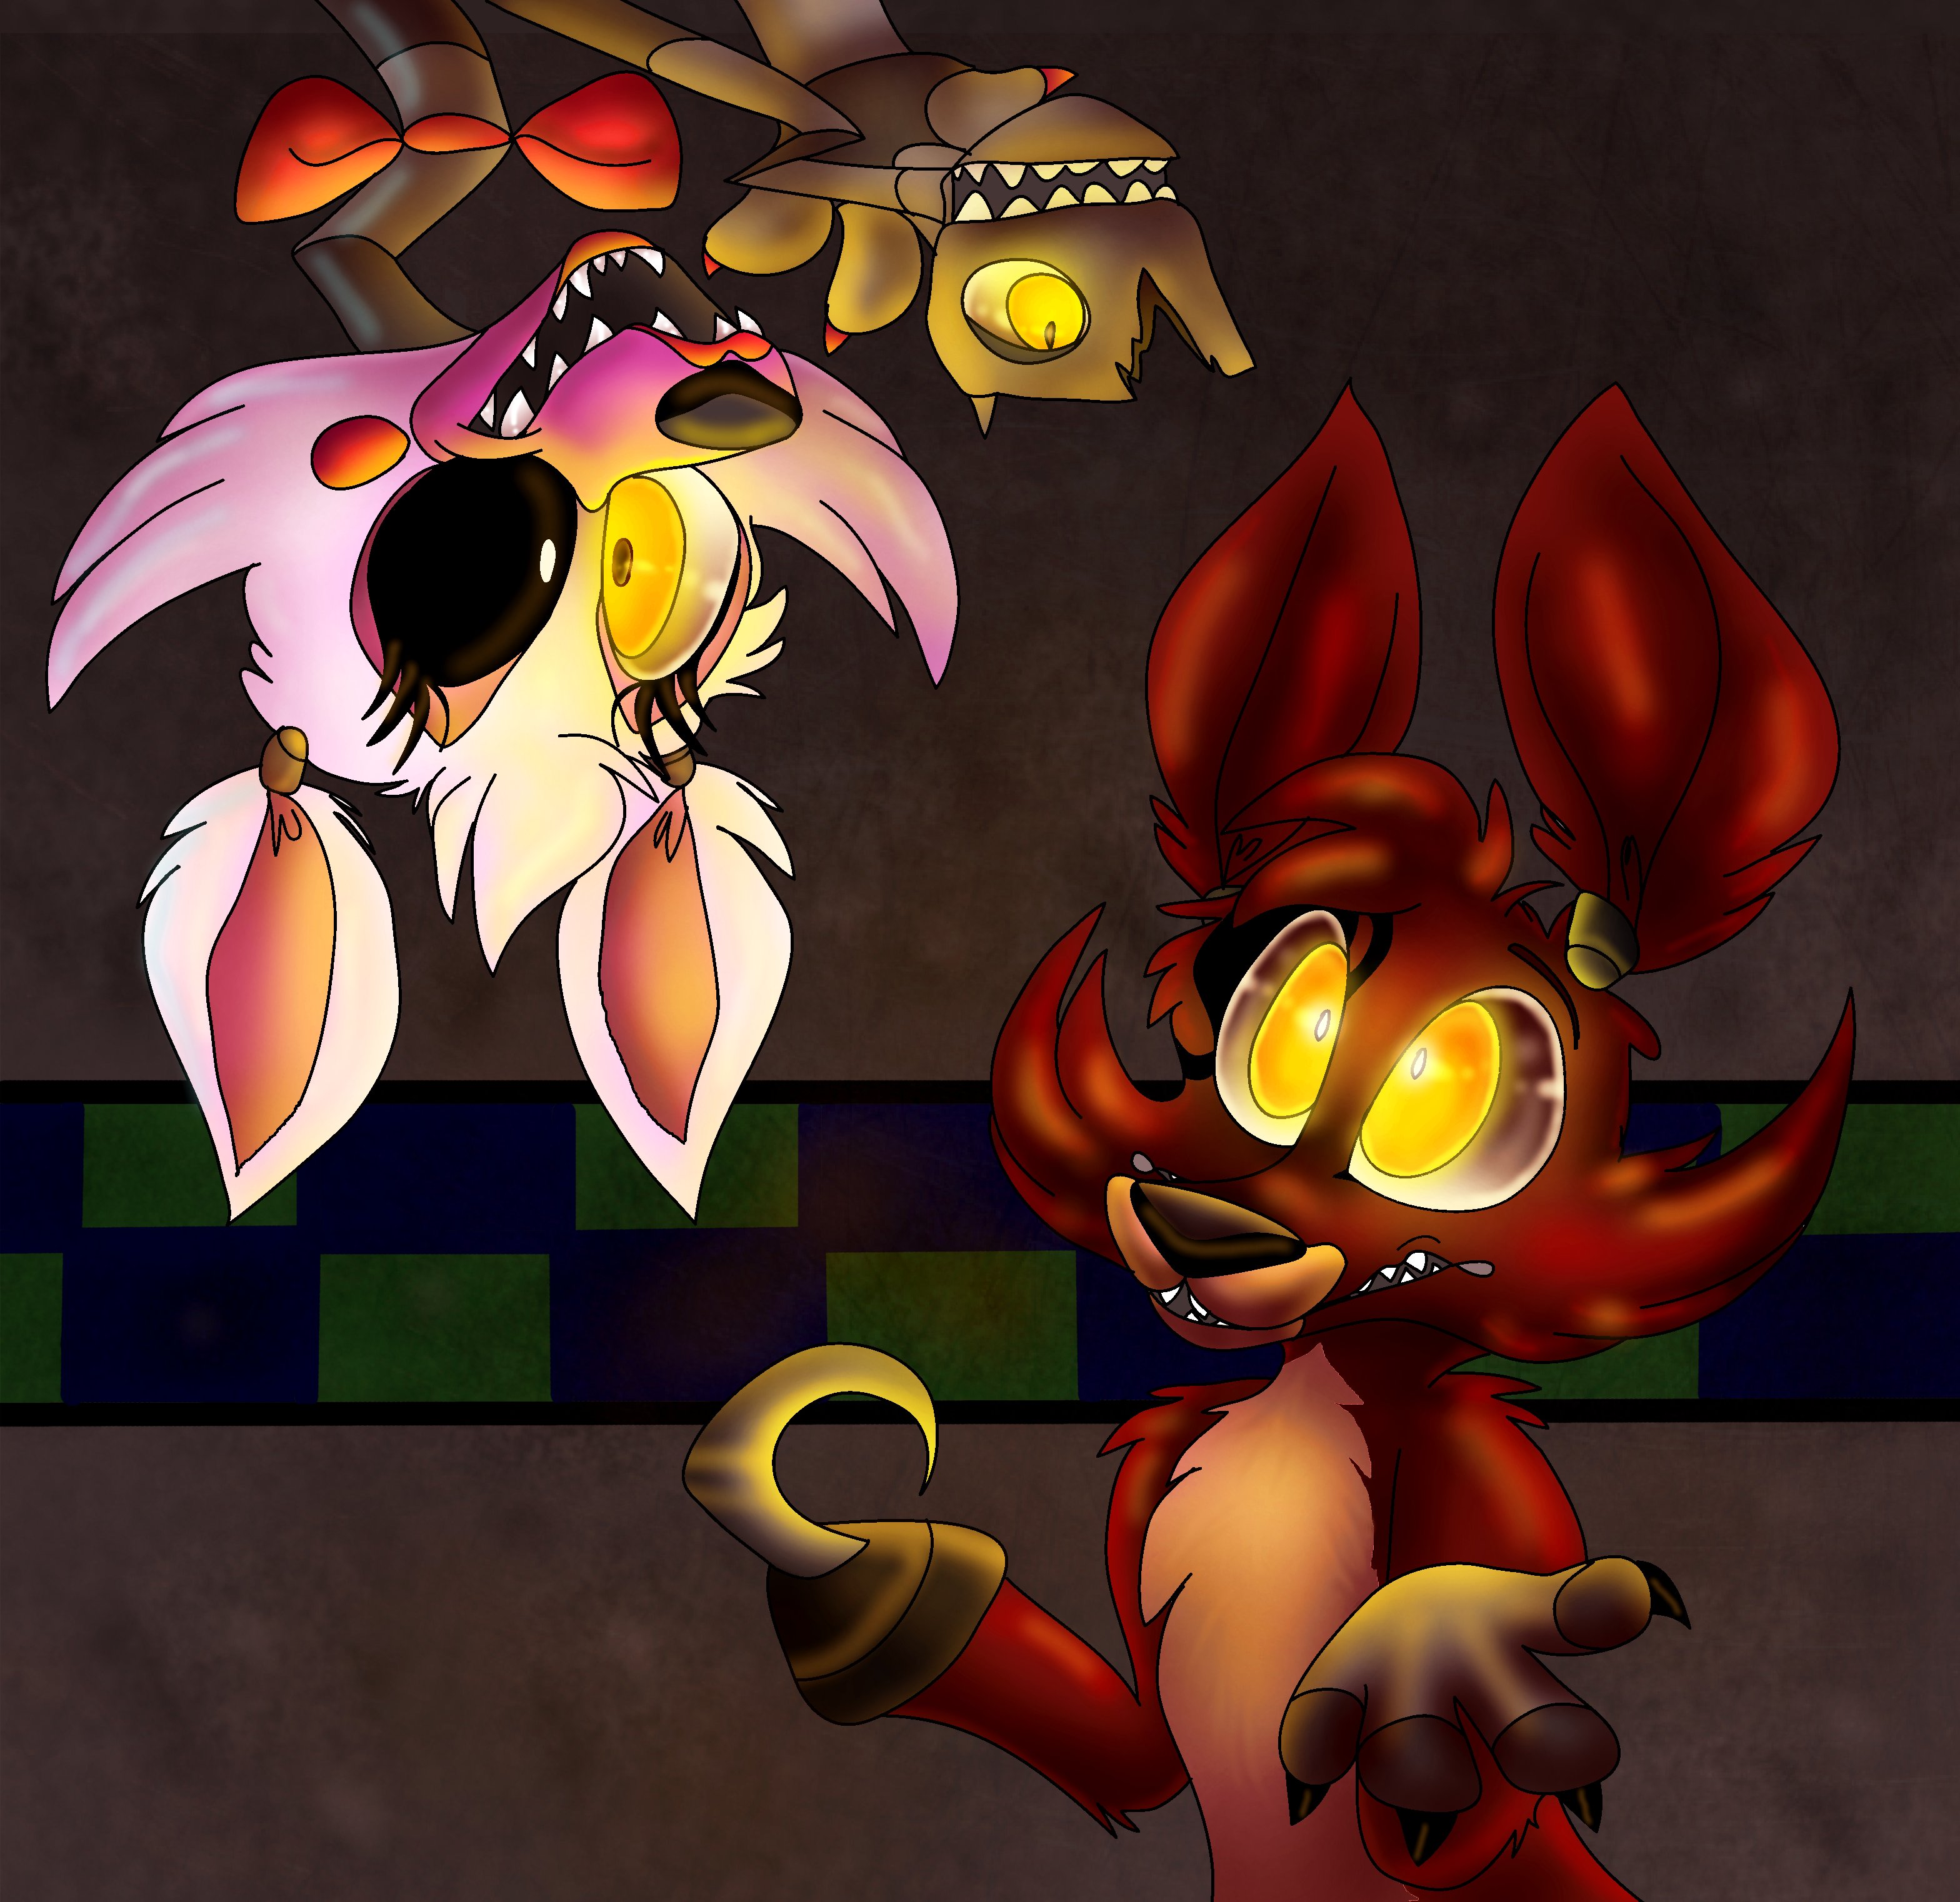 Free Download Foxy And Mangle By Plaguedogs123 3136x3044 For